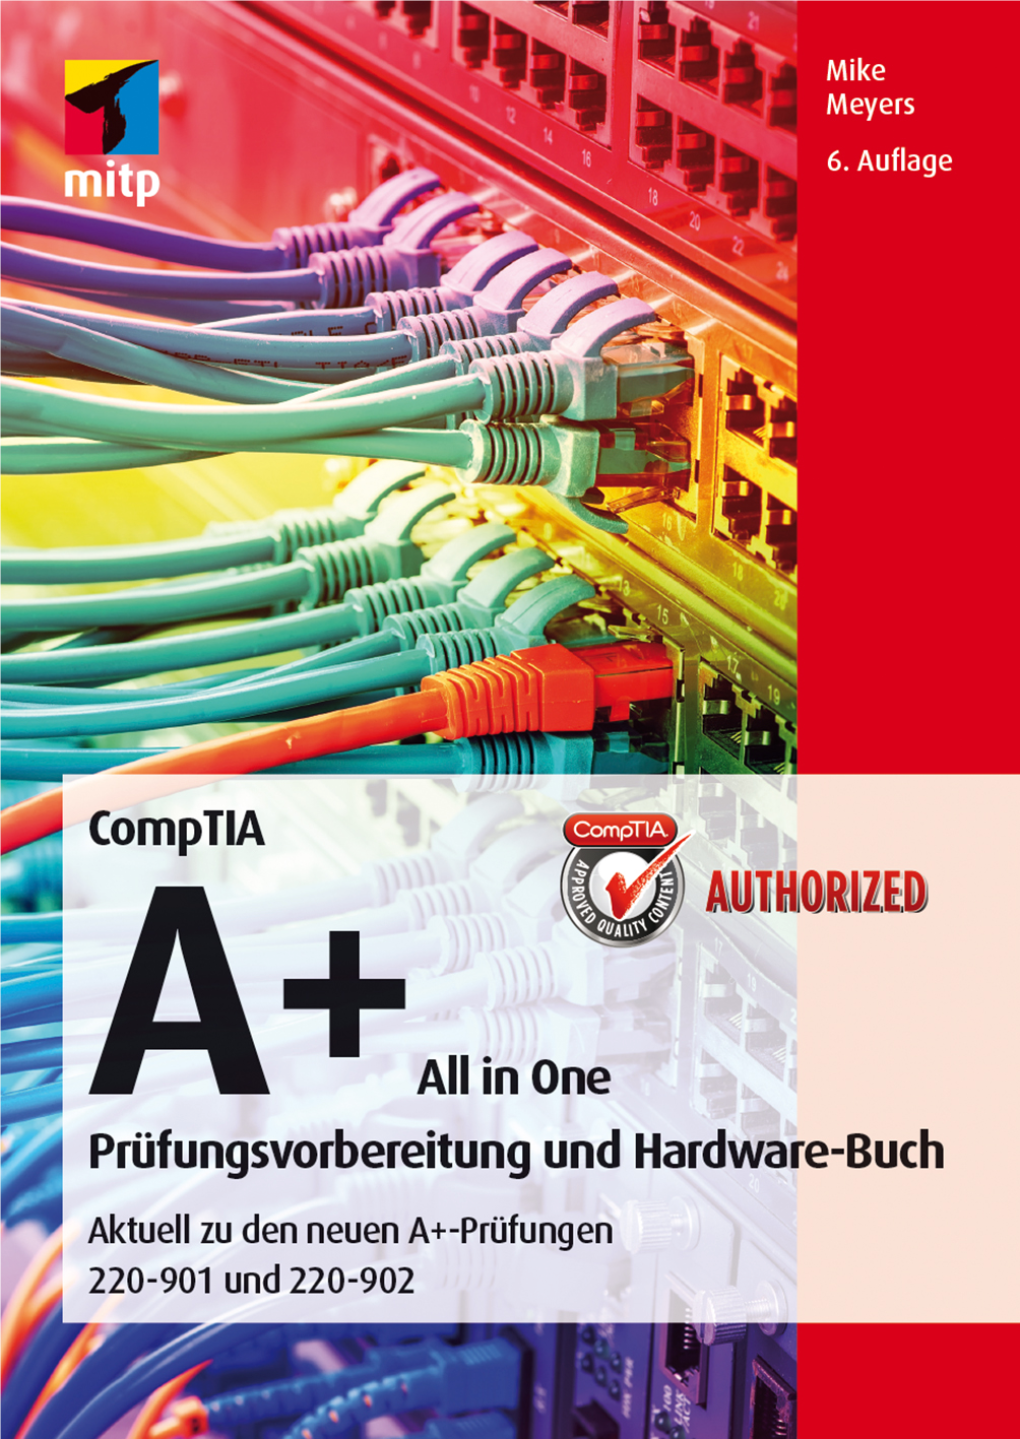 Comptia A+ All in One« (ISBN 9783958453746) 2016 by Mitp Verlags Gmbh & Co